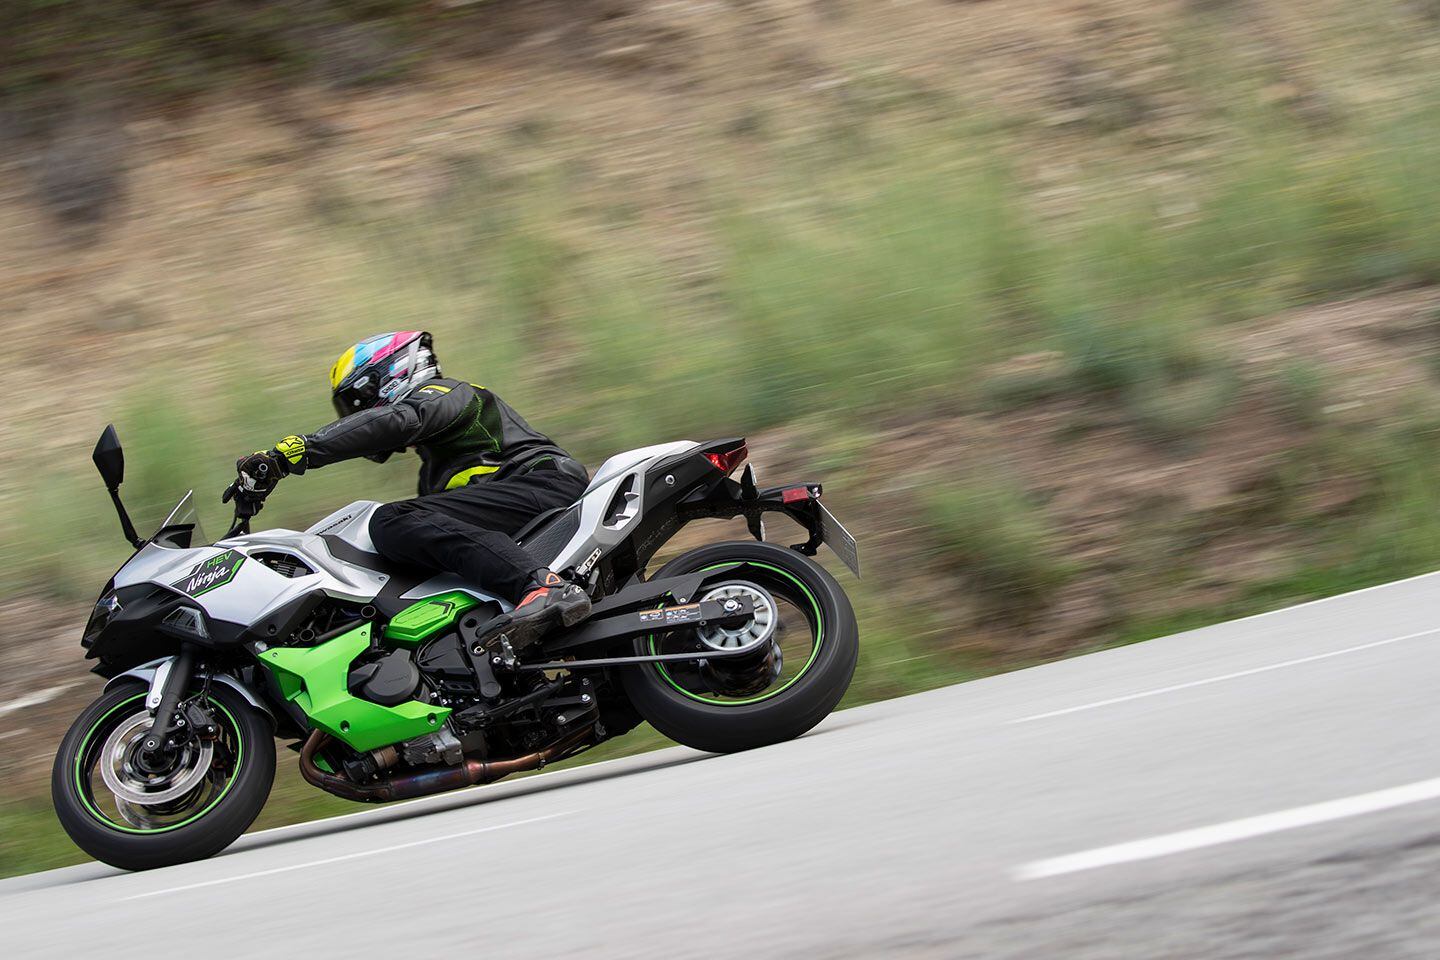 Kawasaki says it was important for the first hybrid model to have a sportbike look and wear the Ninja name. The Ninja 400 is one of its bestselling models and people recognize the Ninja name, which helps draw attention to this model.